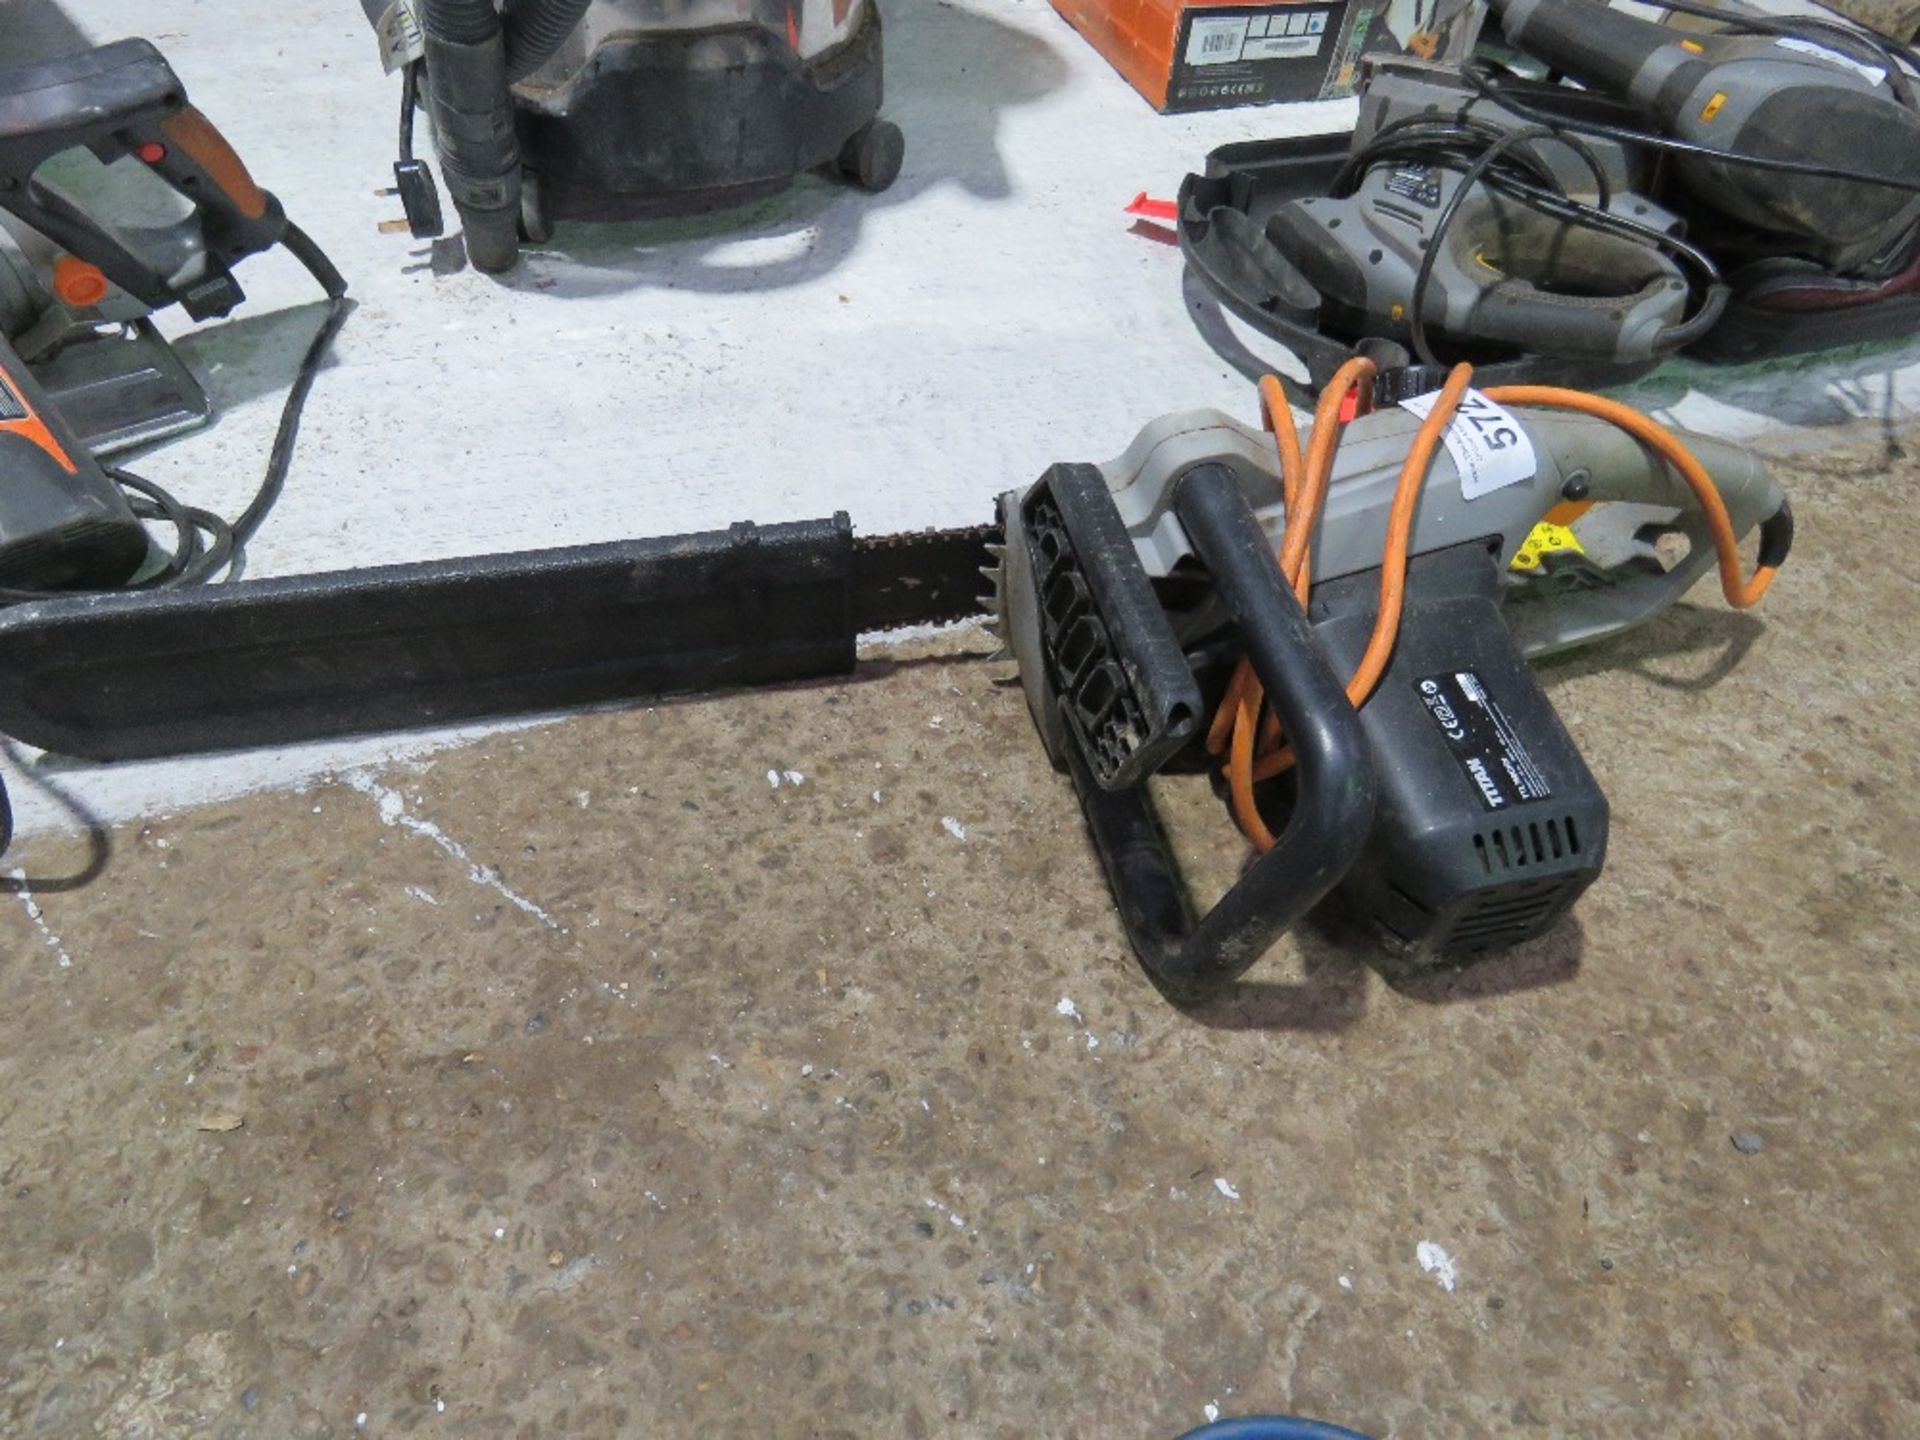 ELECTRIC 240VOLT CHAINSAW. DIRECT FROM LOCAL RETIRING BUILDER. THIS LOT IS SOLD UNDER THE AUCTI